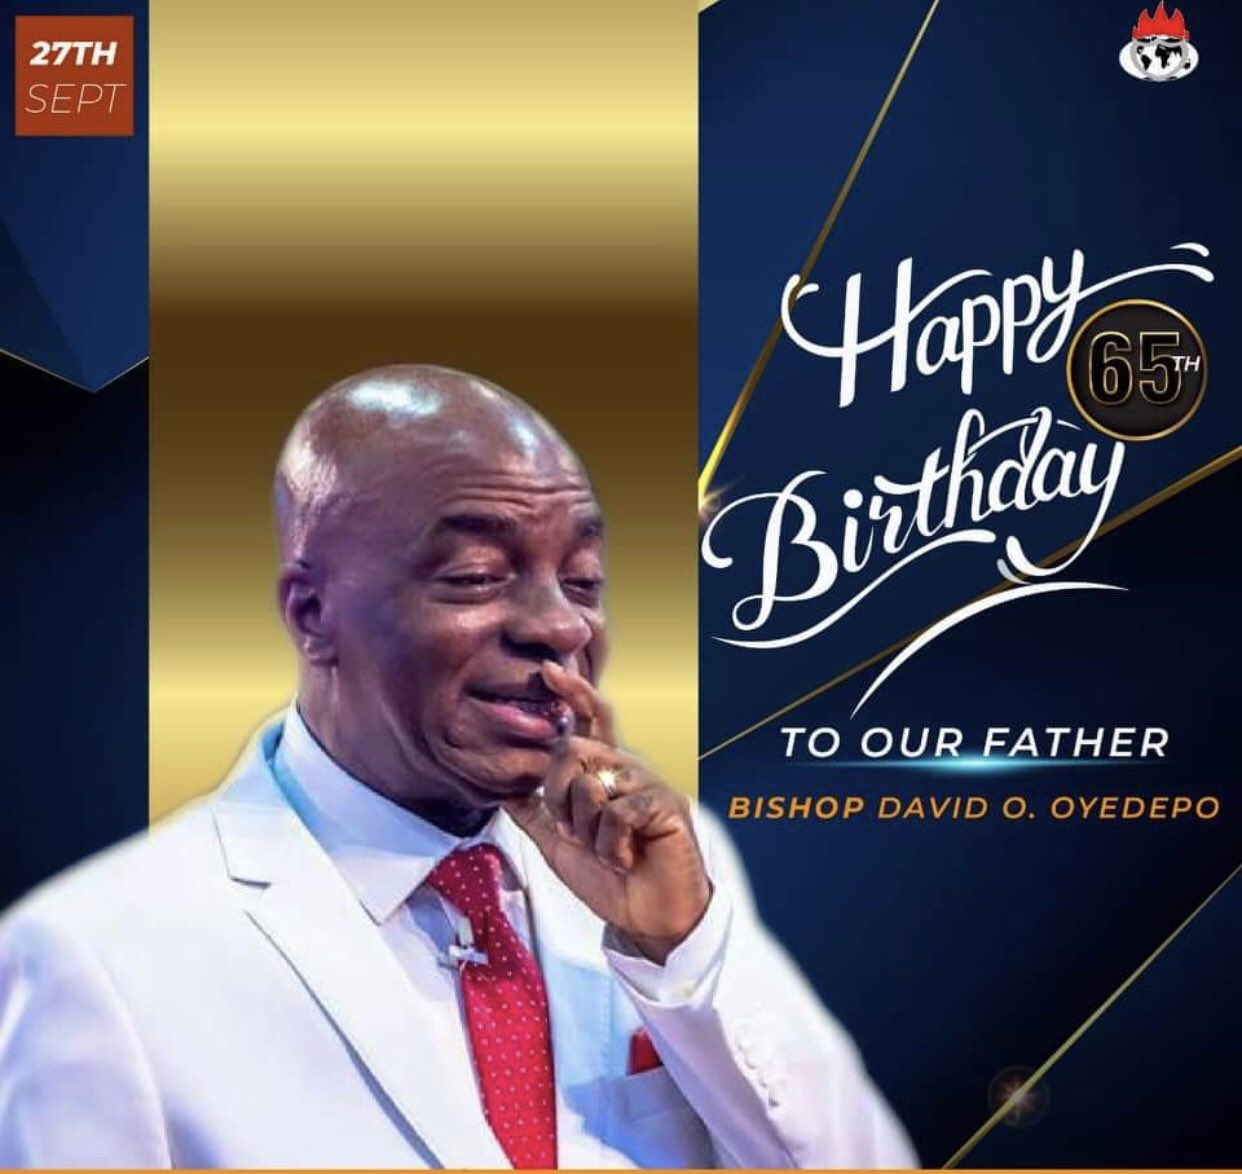 Happy birthday to my father Bishop David Oyedepo. More unction sir. Keep depopulating the kingdom of darkness. 